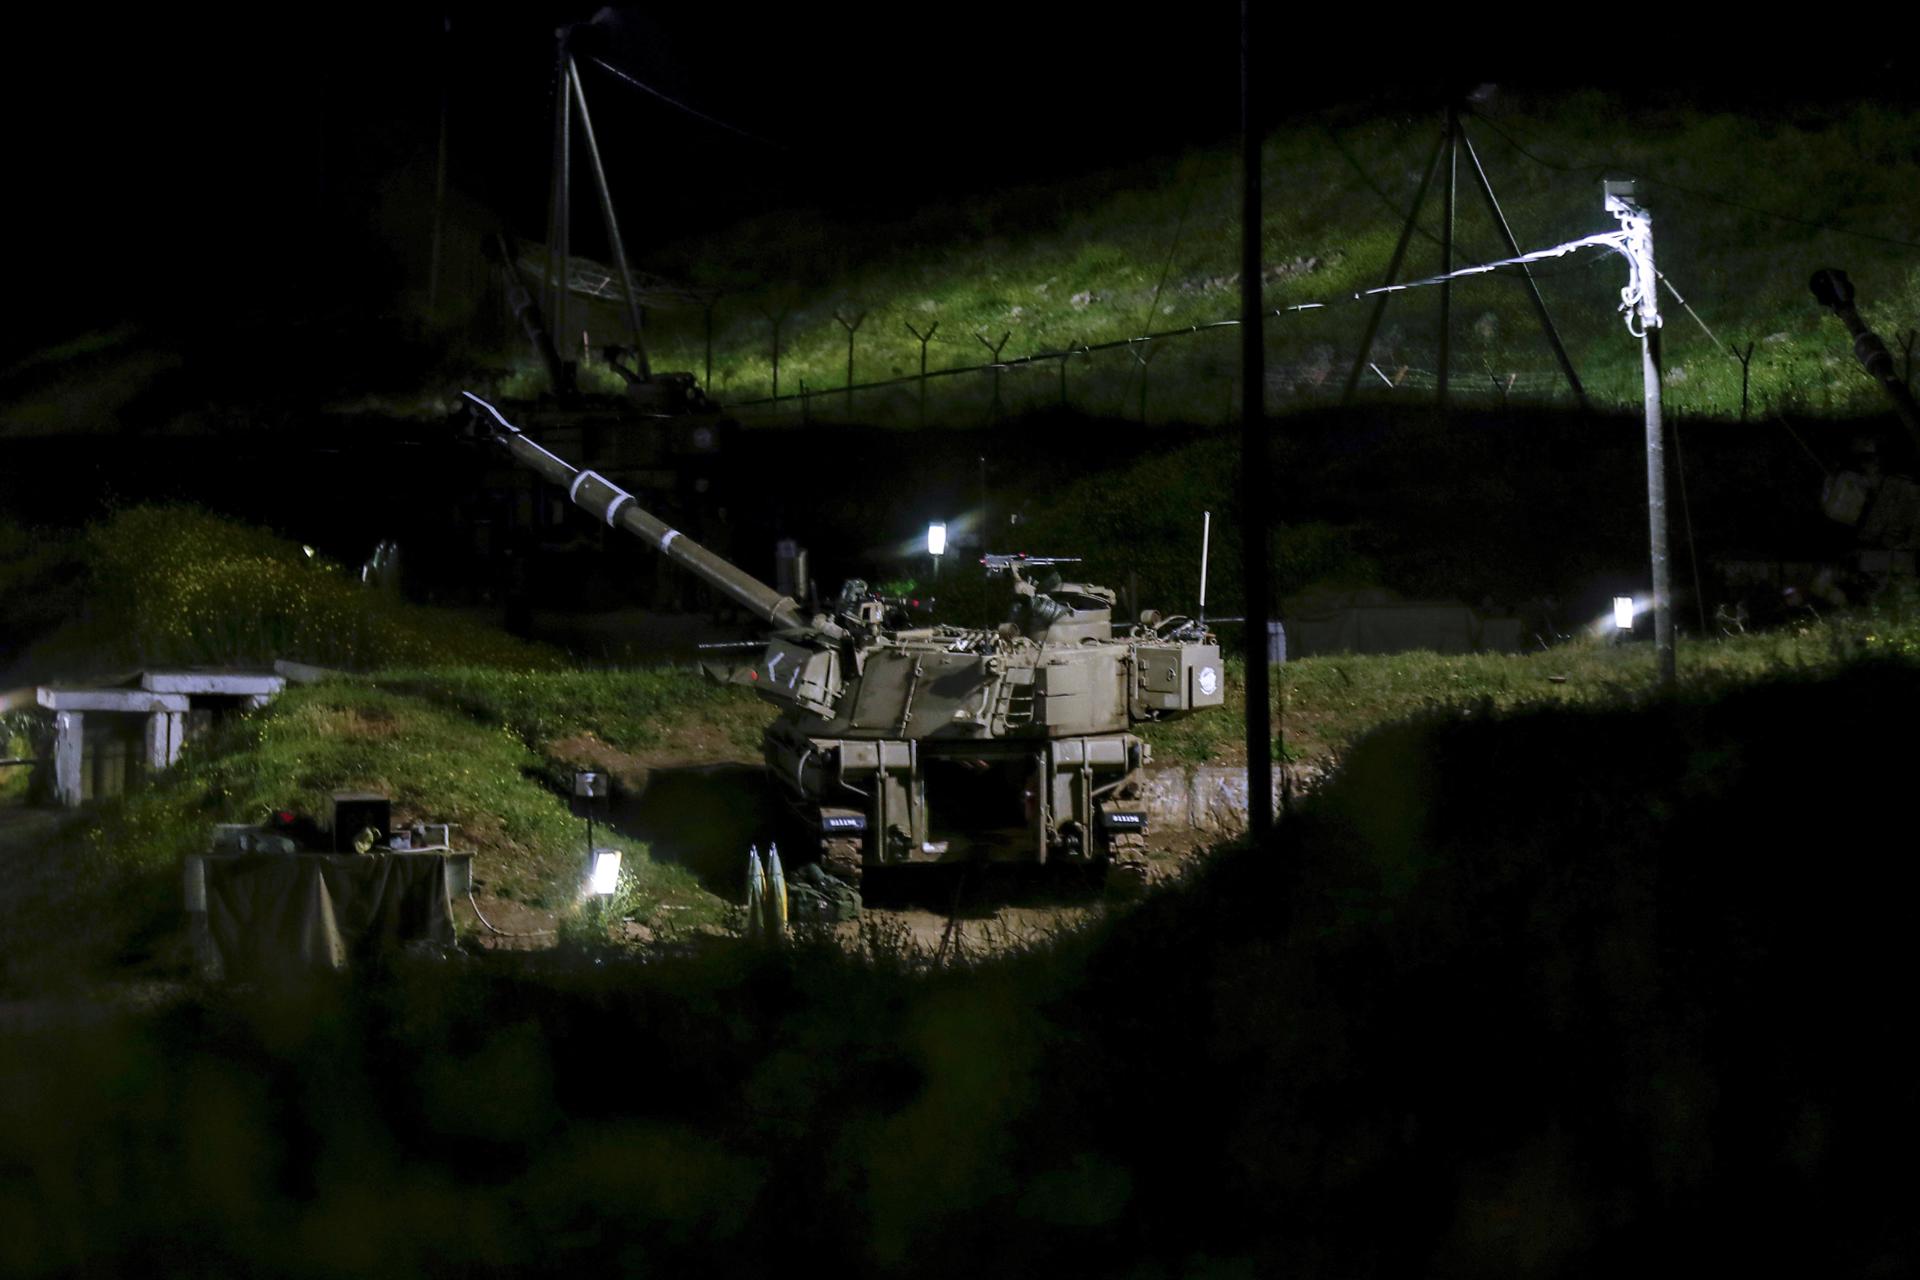 A view on 6 April 2023 of an Israel Defense Forces battery on Israel's northern border. EFE/EPA/ATEF SAFADI